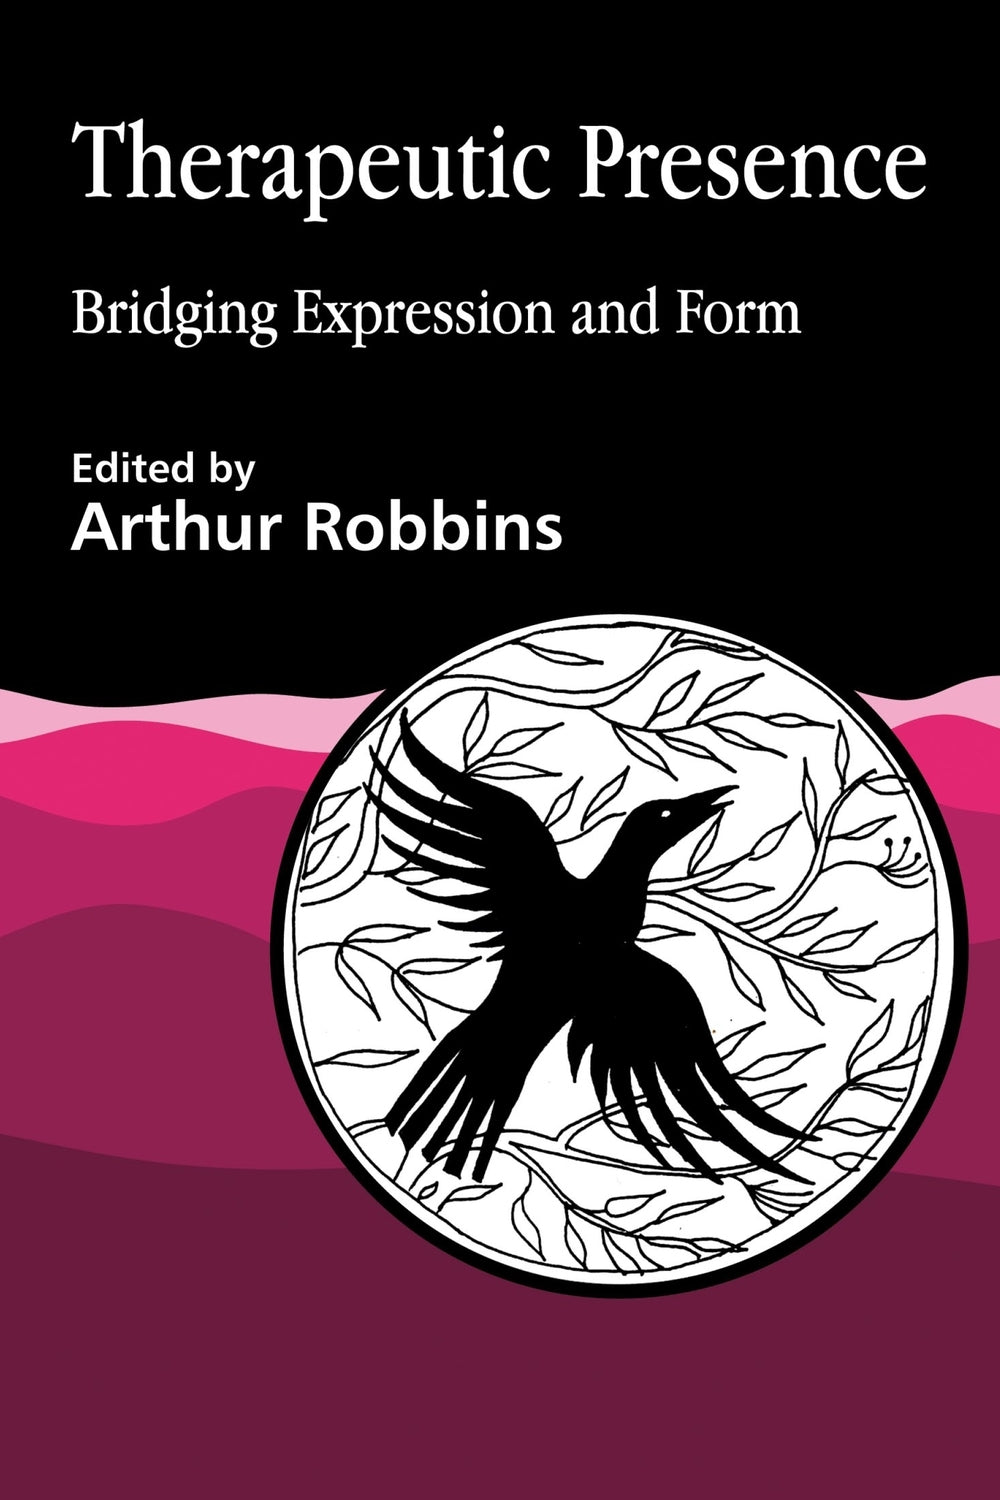 Therapeutic Presence by Arthur Robbins